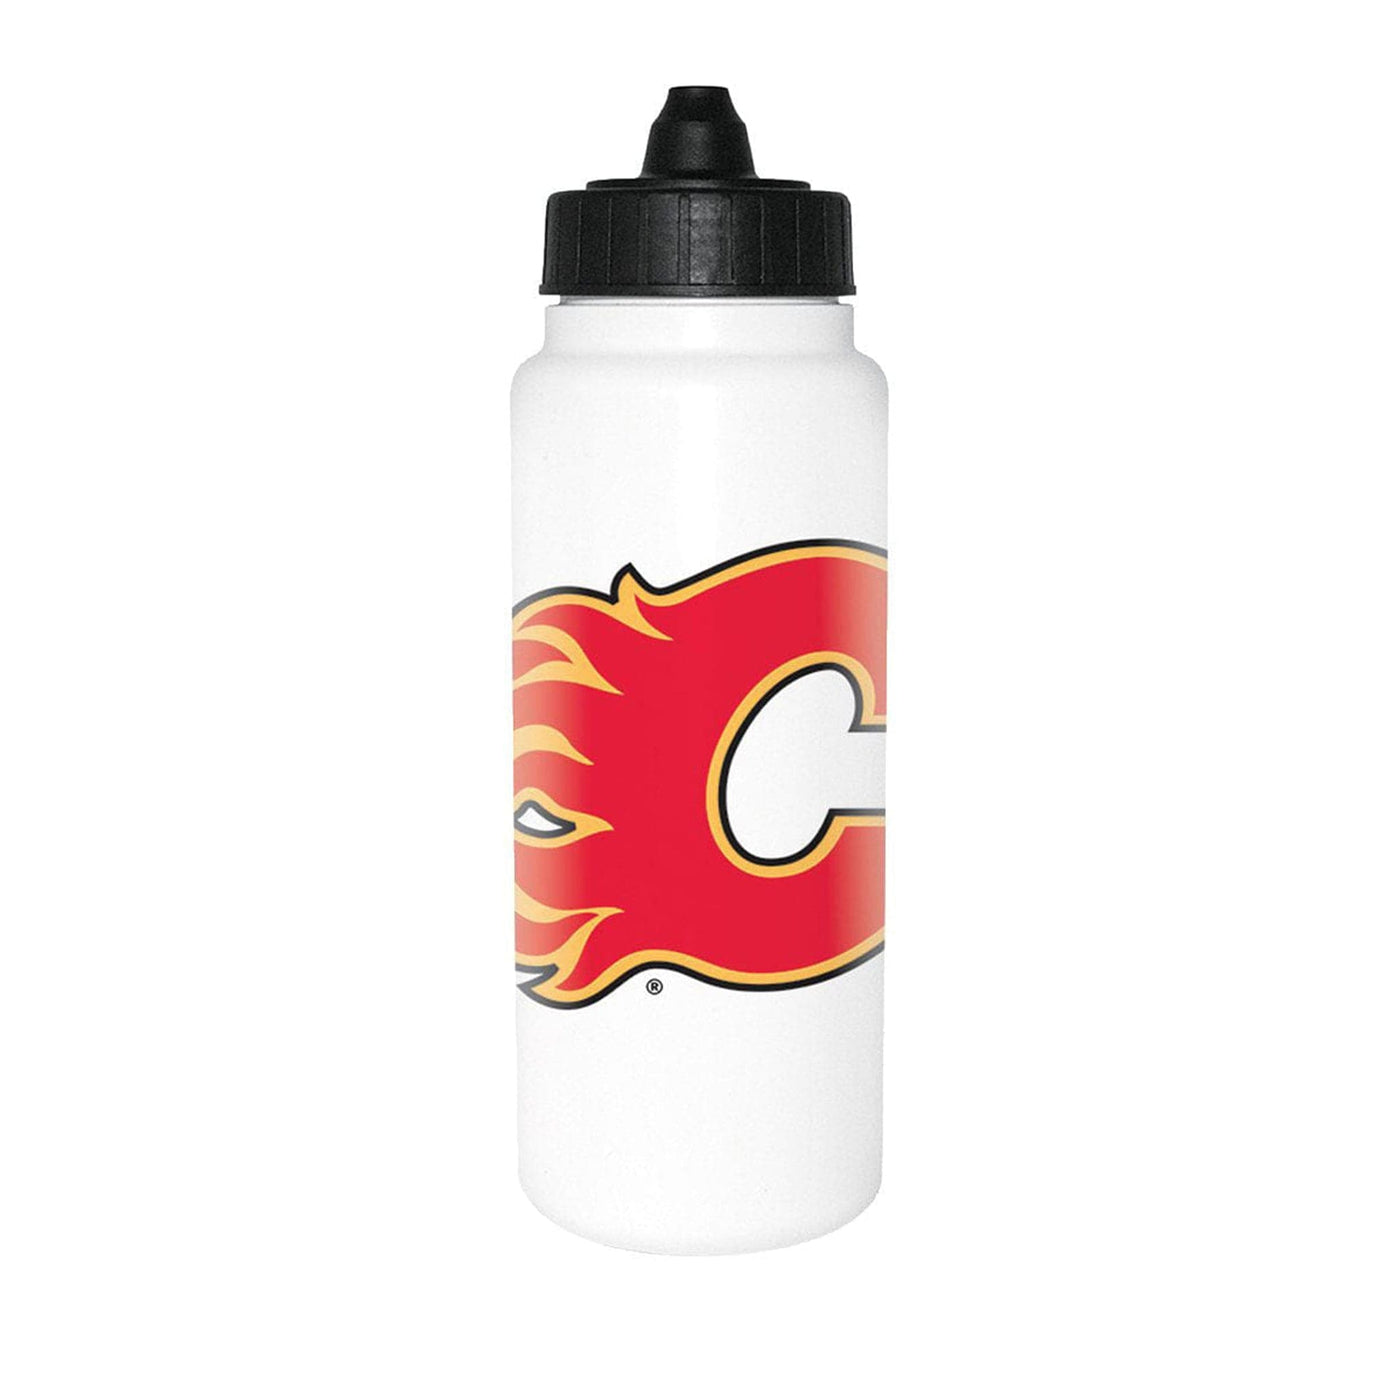 Calgary Flames Inglasco NHL Tall Water Bottle - The Hockey Shop Source For Sports